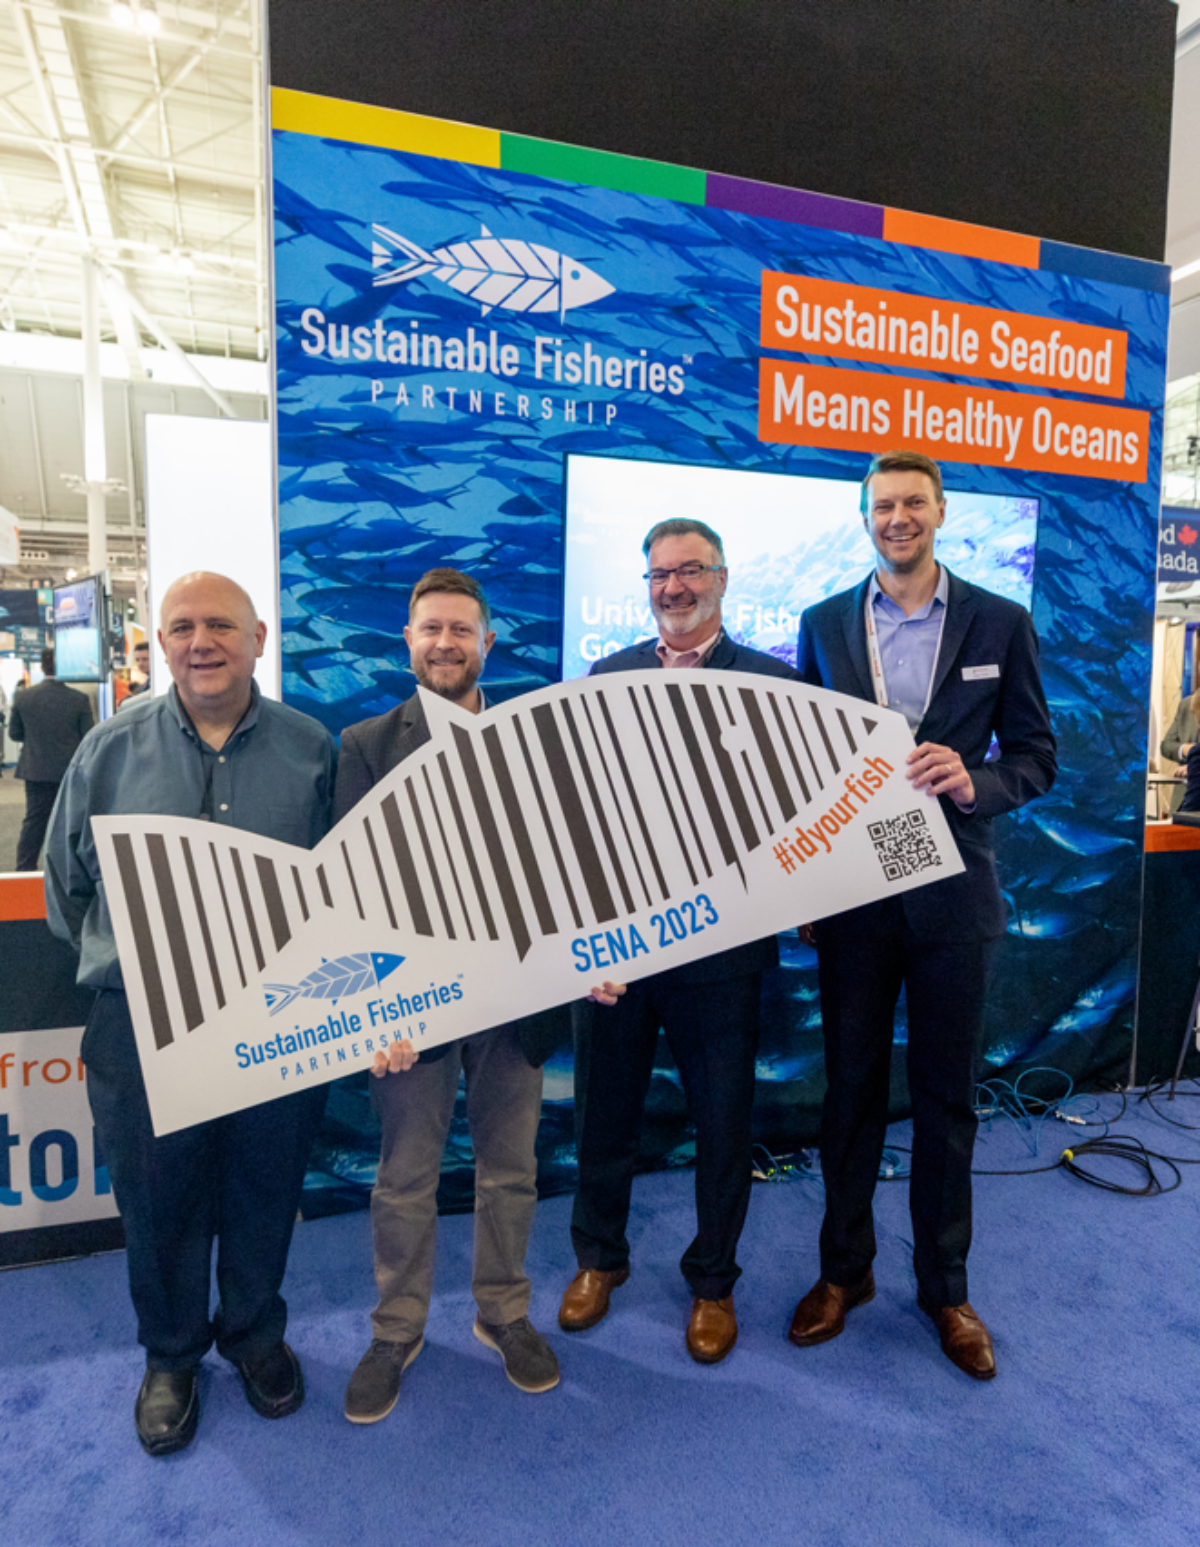 Fishery IDs pilot project participants with big fish at Seafood Expo North America